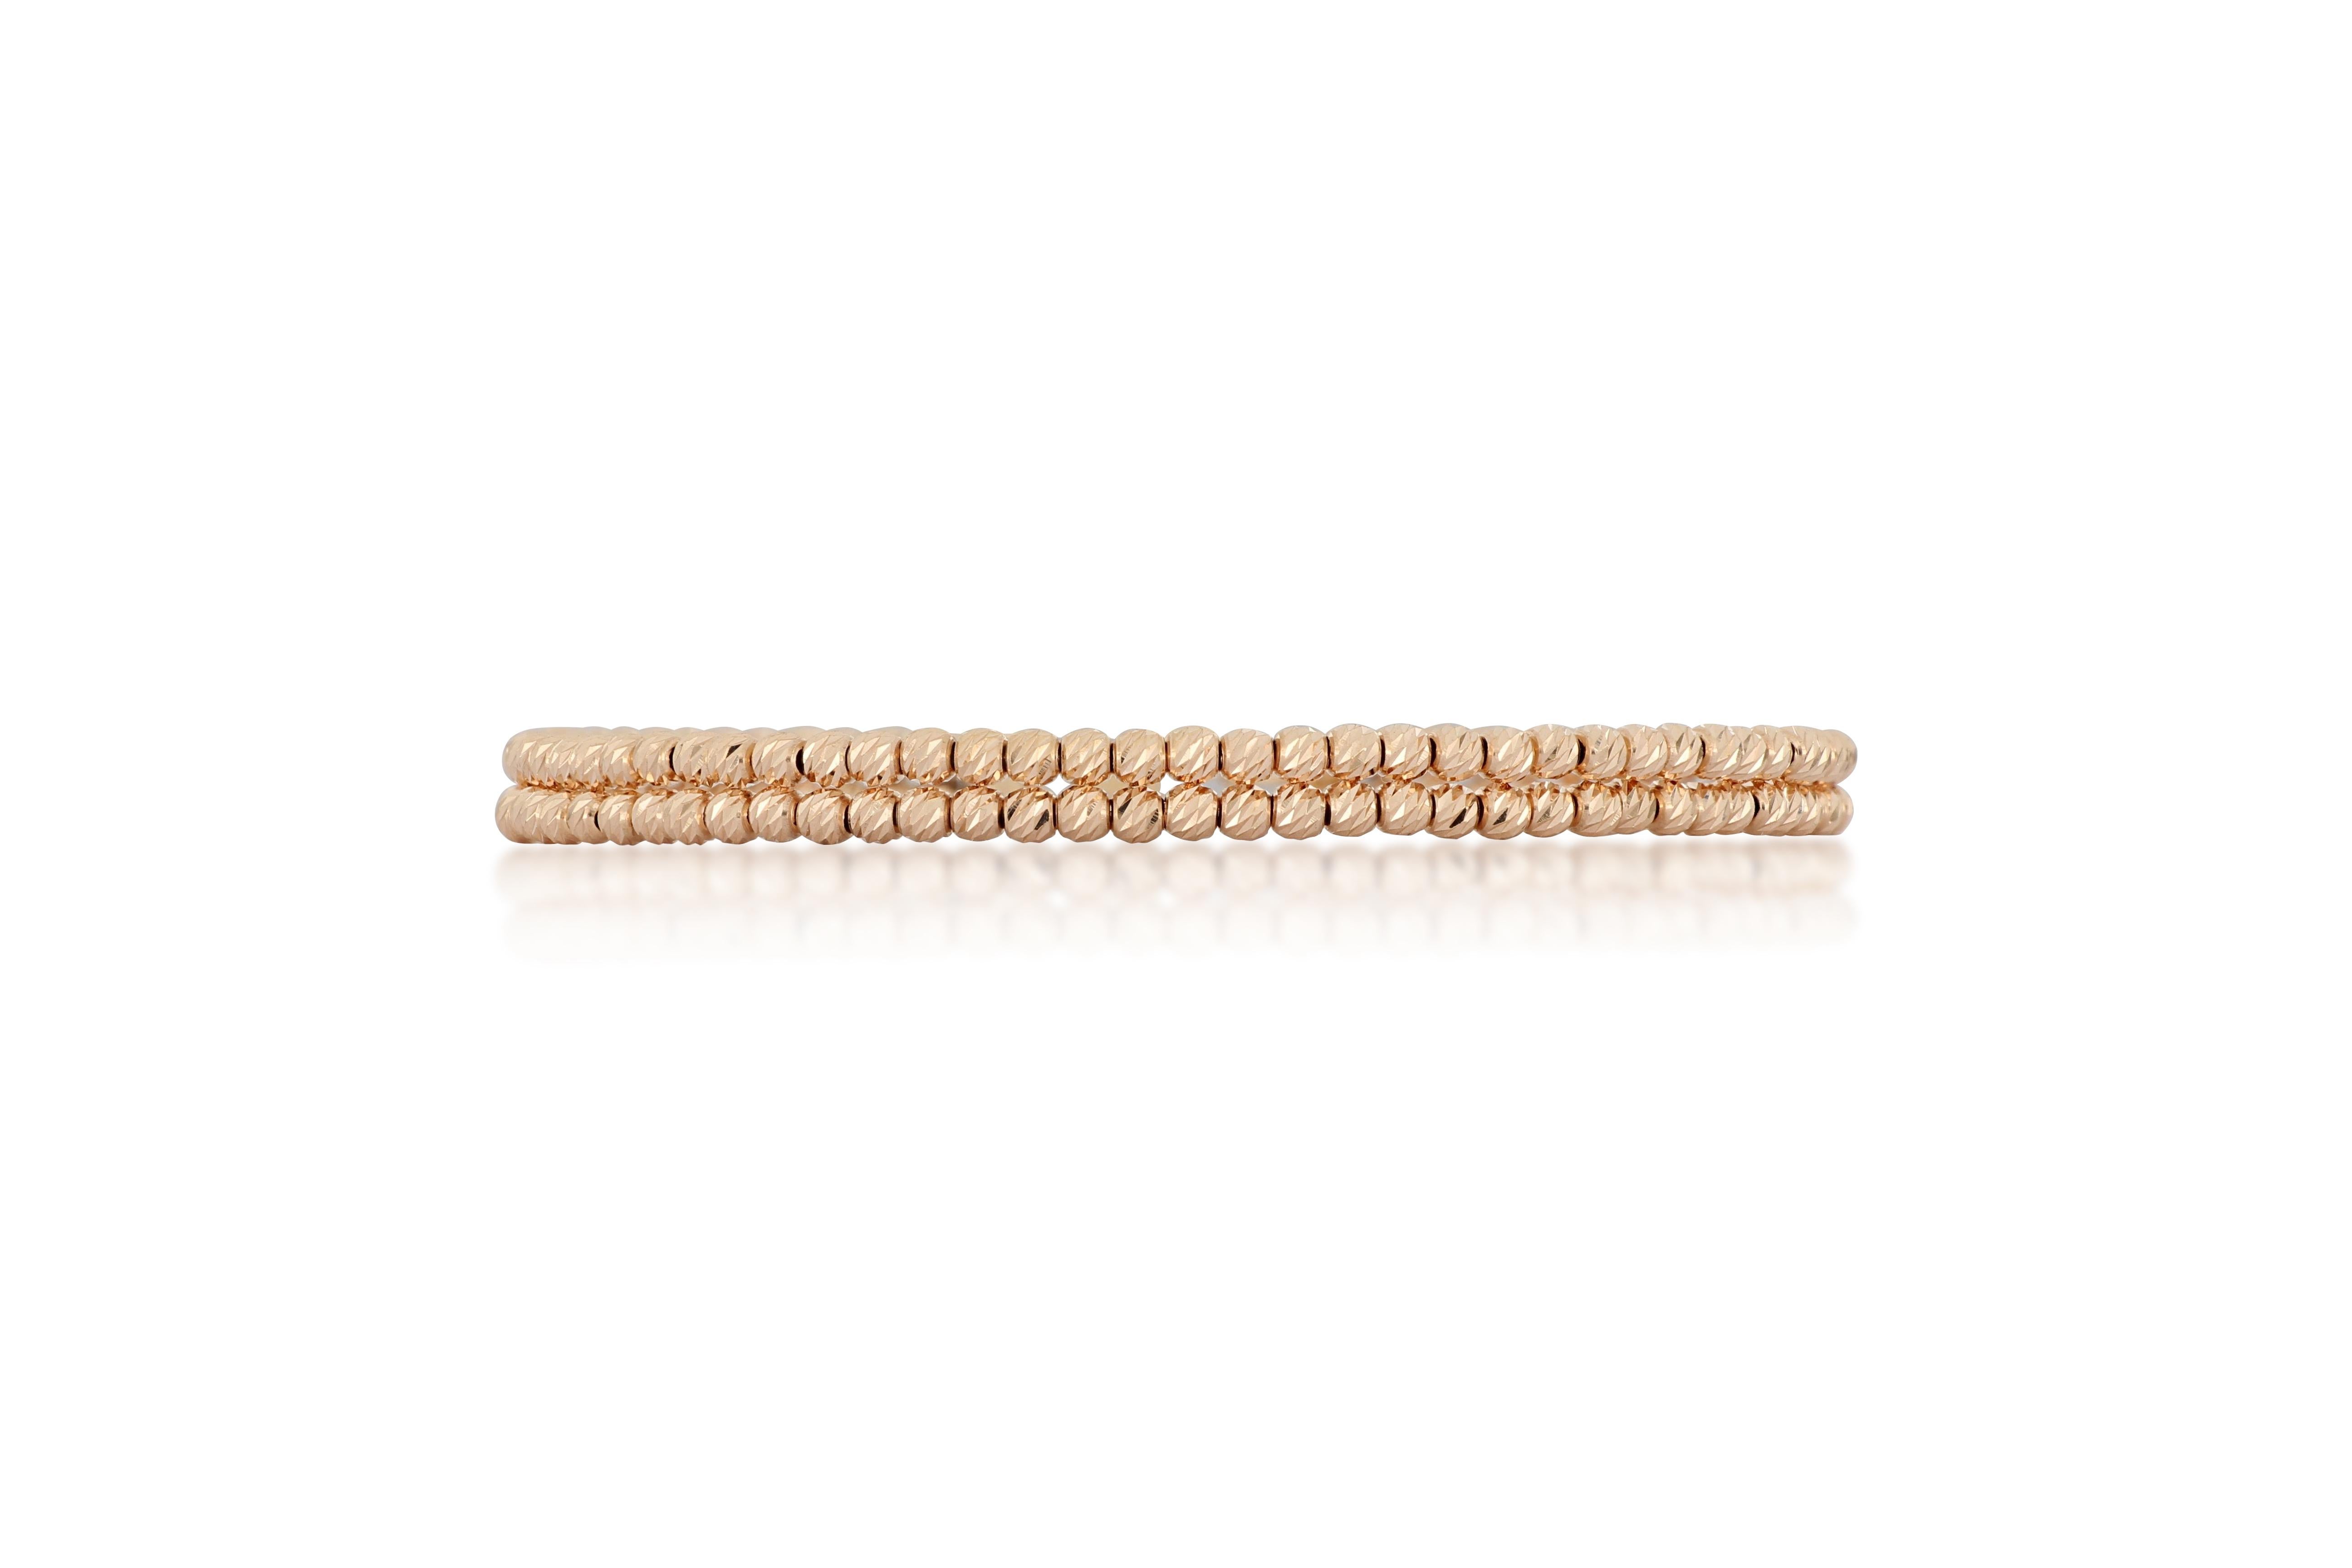 This beautiful piece of 18K rose gold jewellery is composed of double rows of diamond-cut beads stitched into a sparkling bangle, it's causal and  very stylish, suitable for everyday wear.

The company was founded one and a half centuries ago in